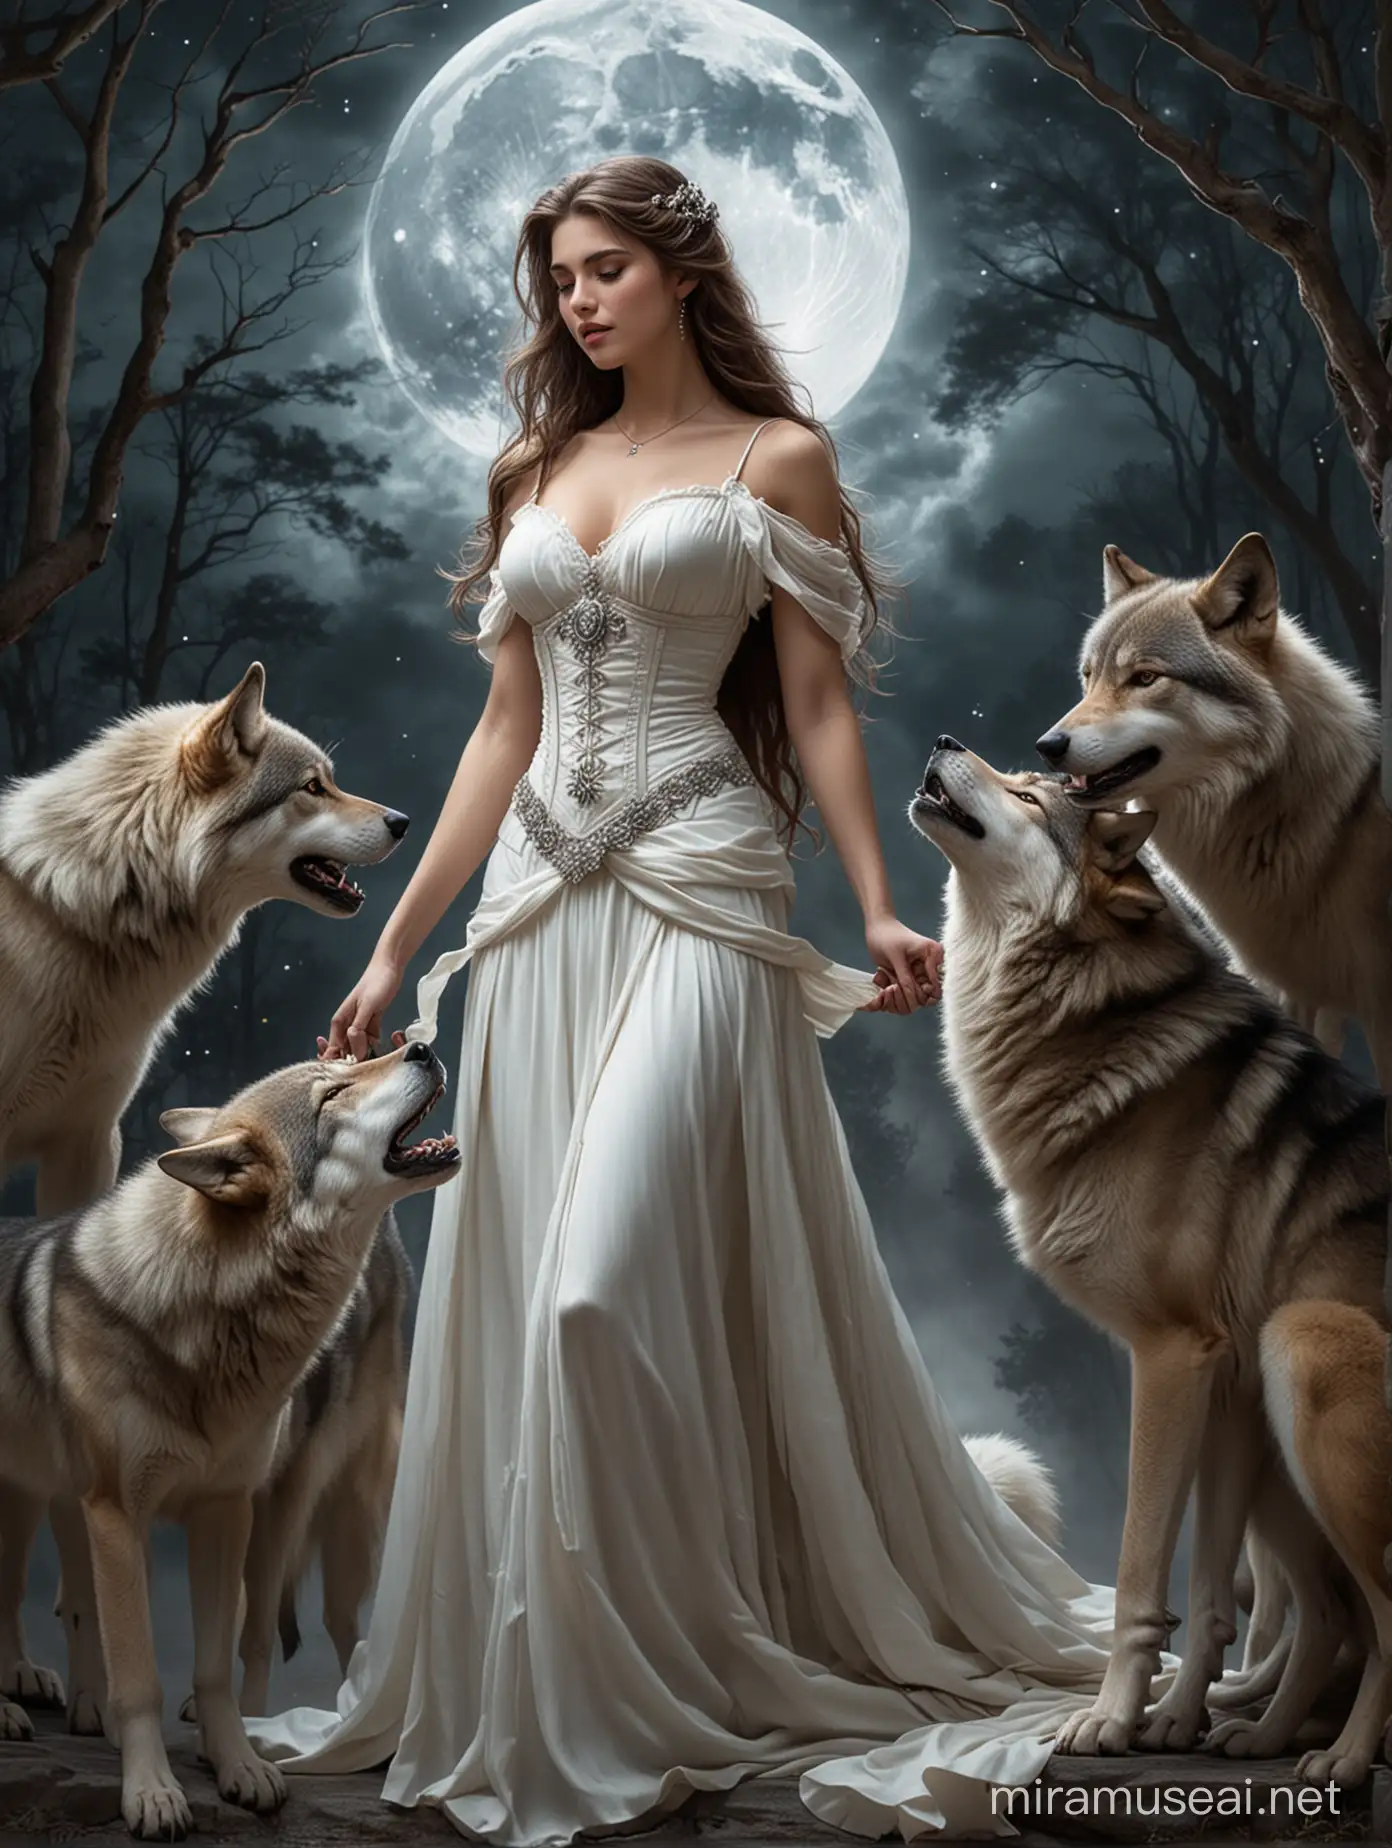 A beautiful lady held romantically from the waist by a handsome young man, with wolves beside them, under the moon